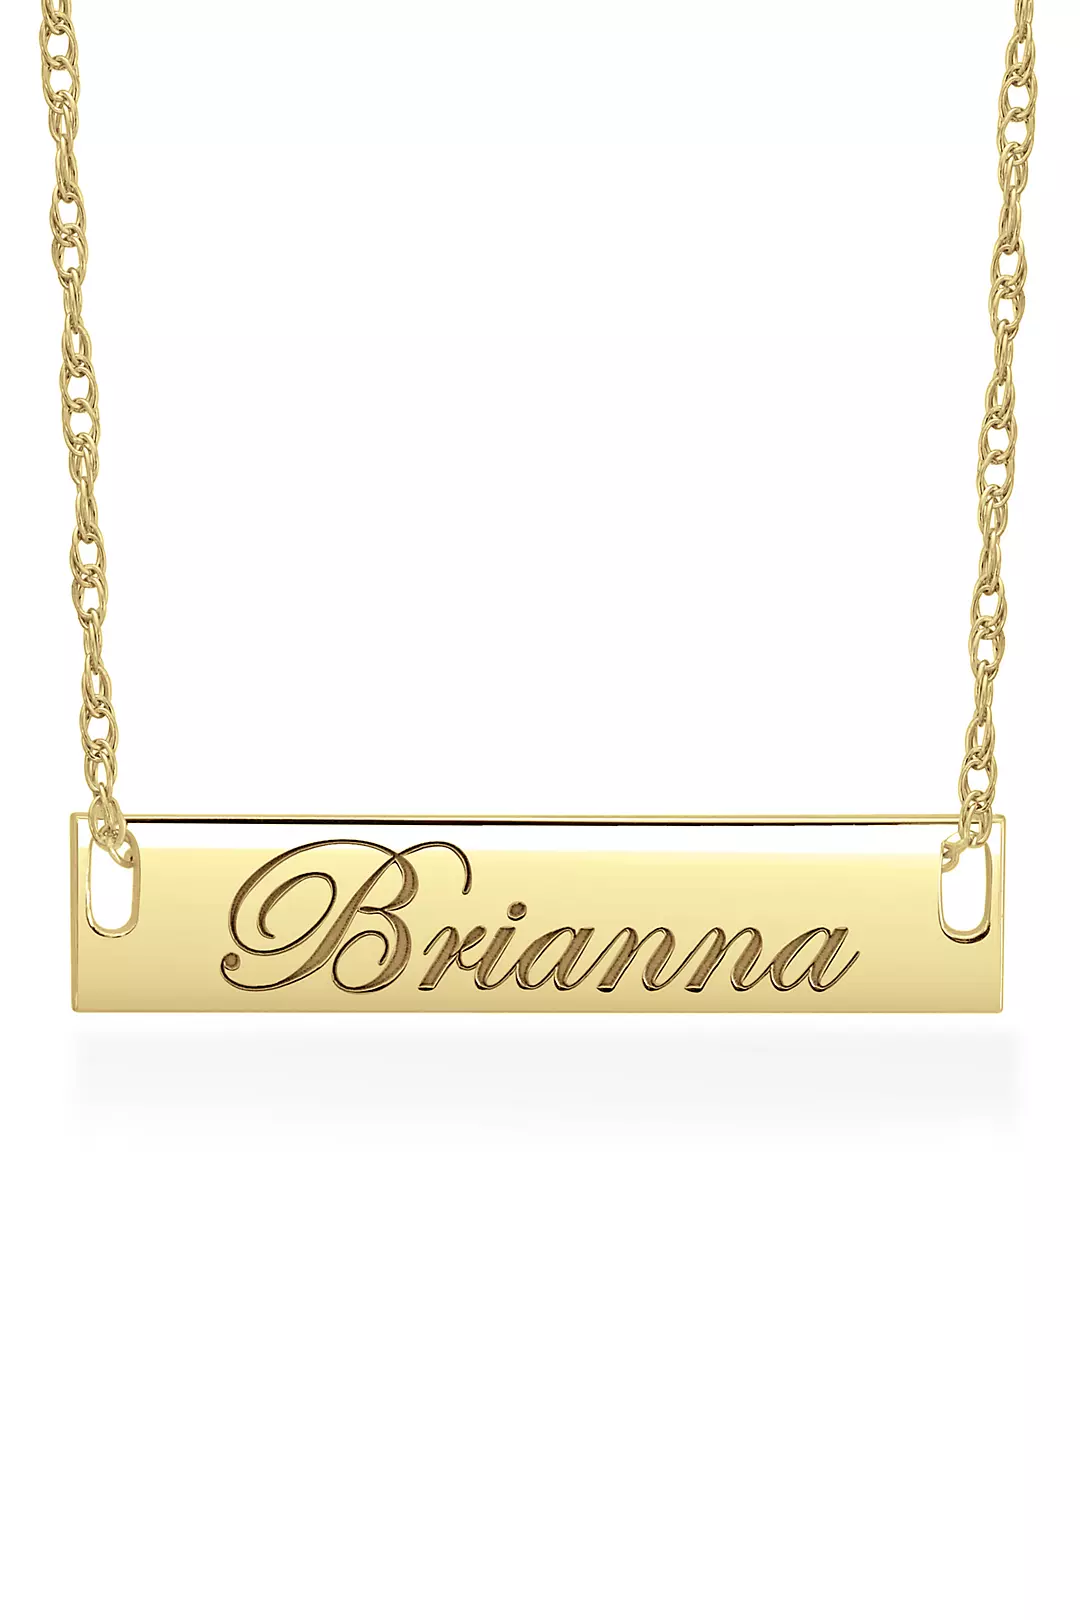 Personalized Bar Necklace with Script Lettering Image